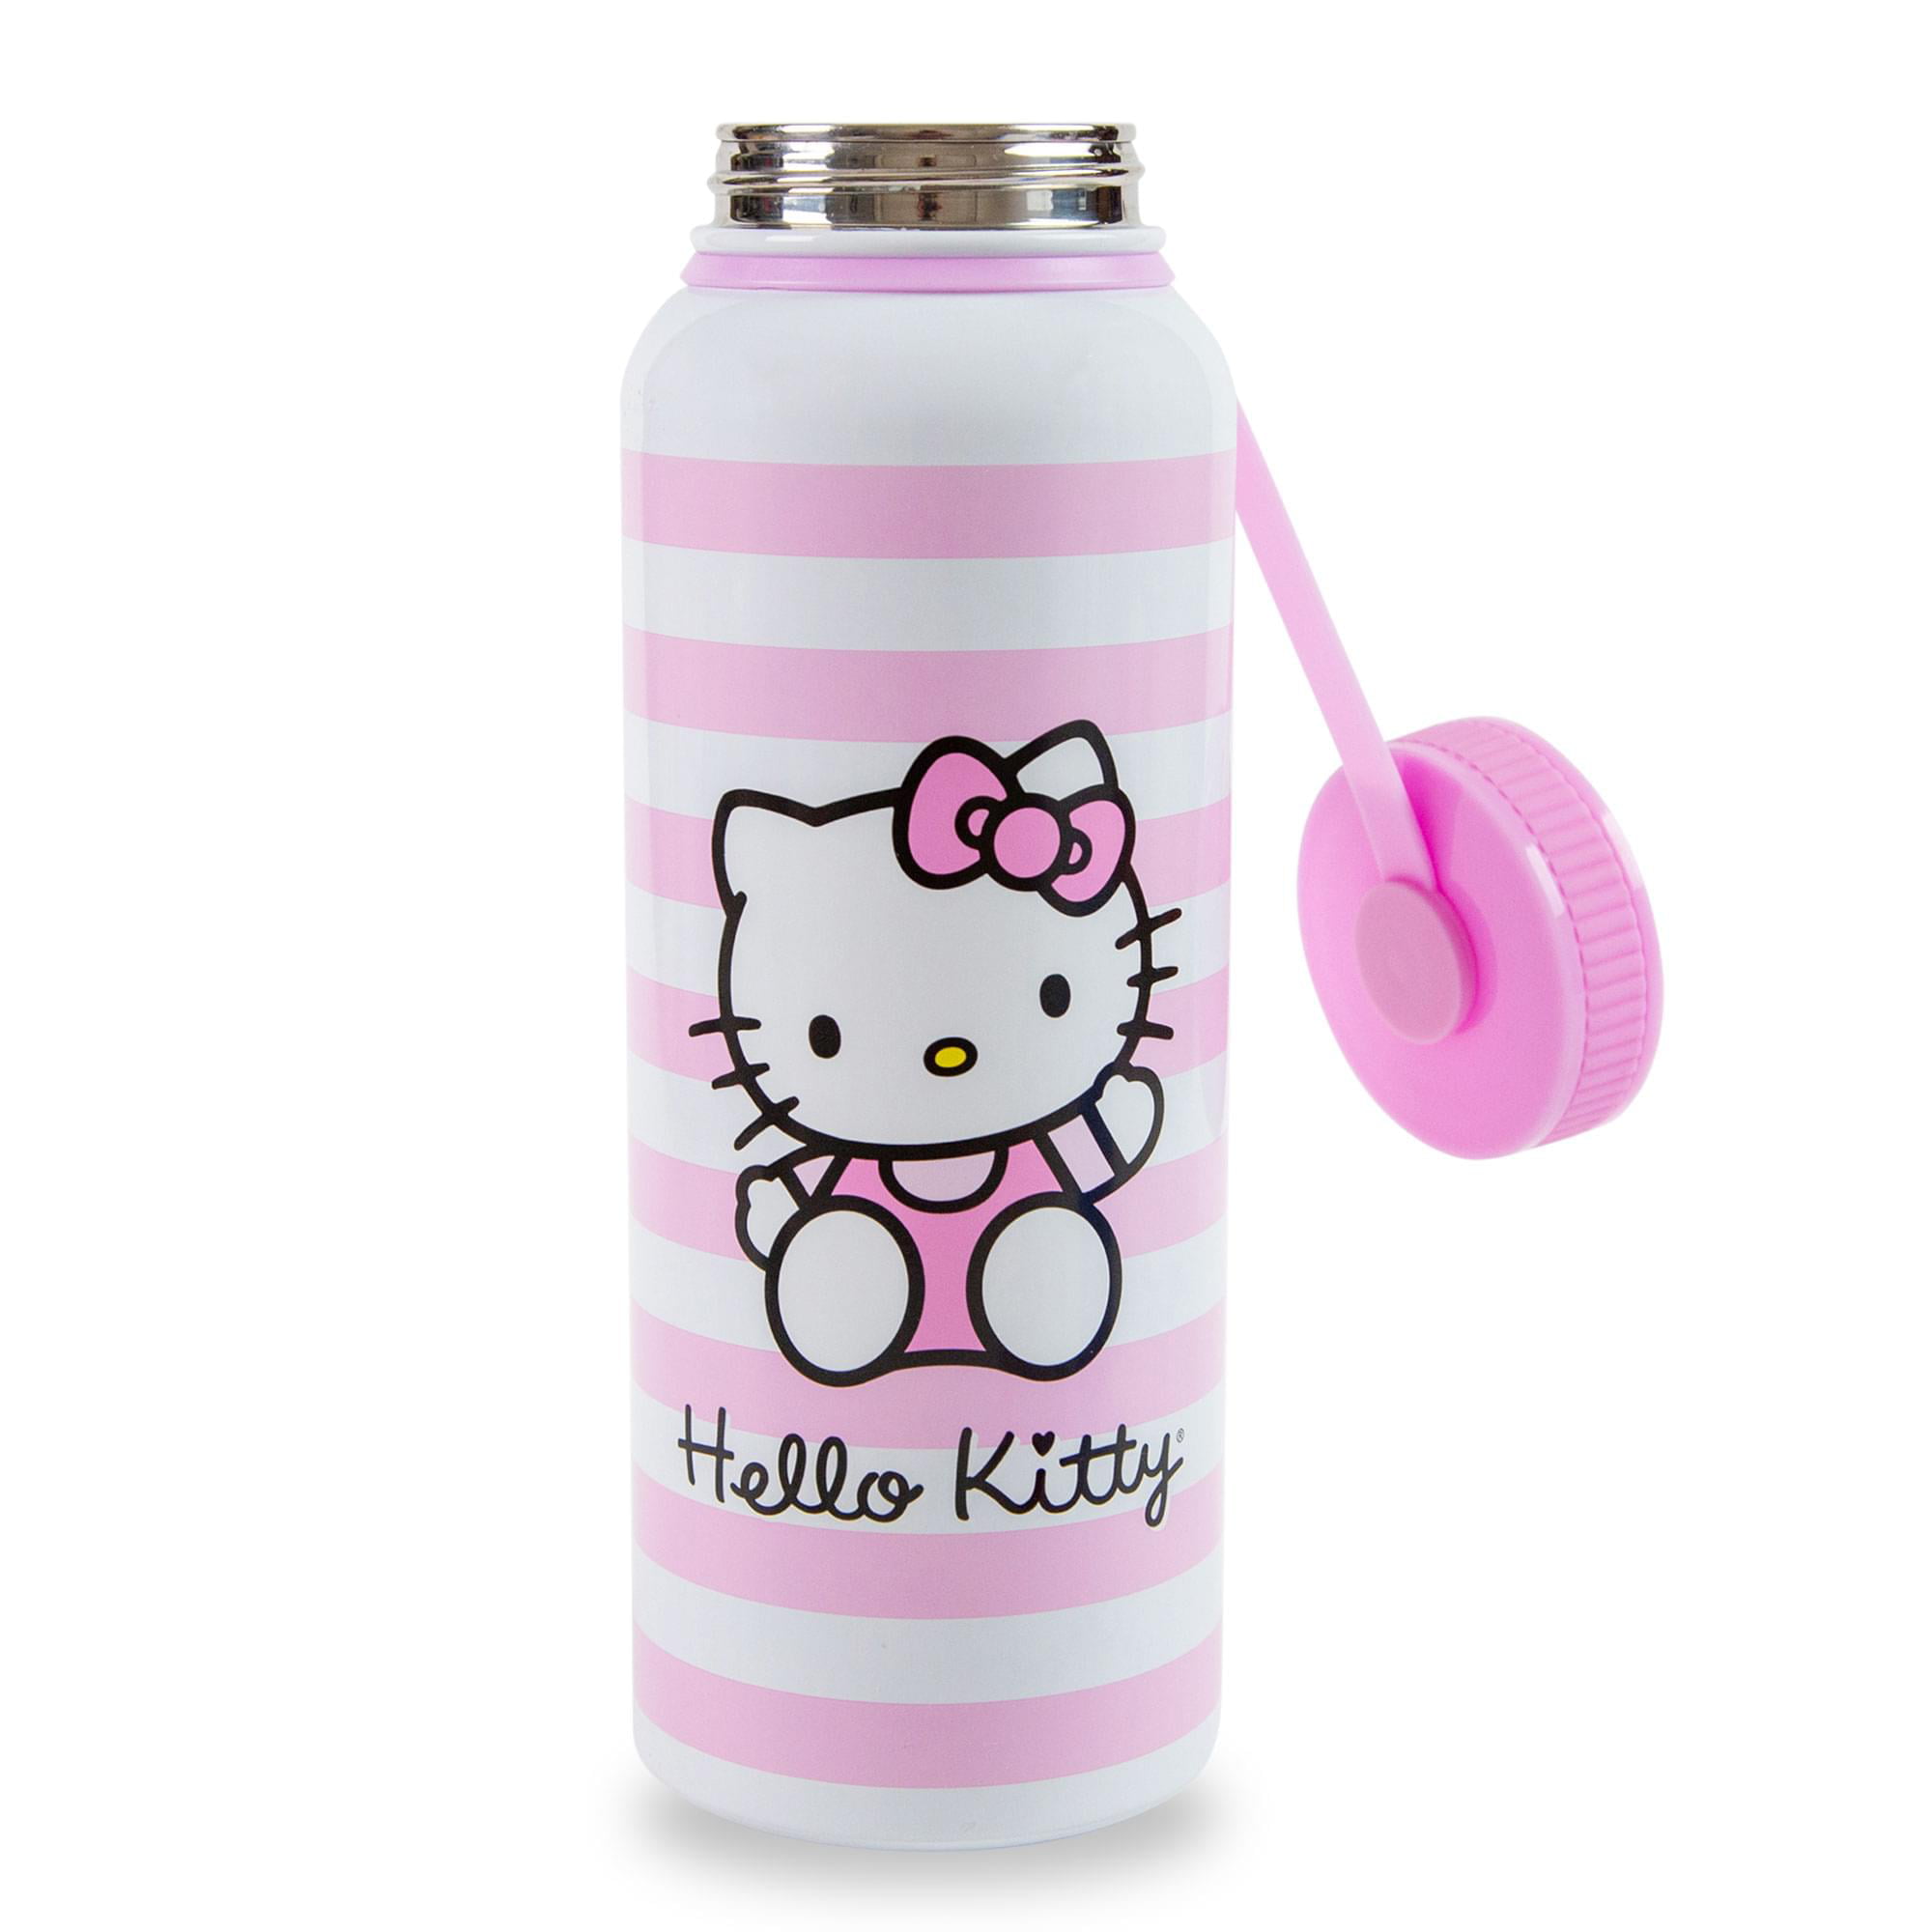 Everyday Delights Sanrio Hello Kitty Stainless Steel Insulated Water Bottle  Pink 500ml